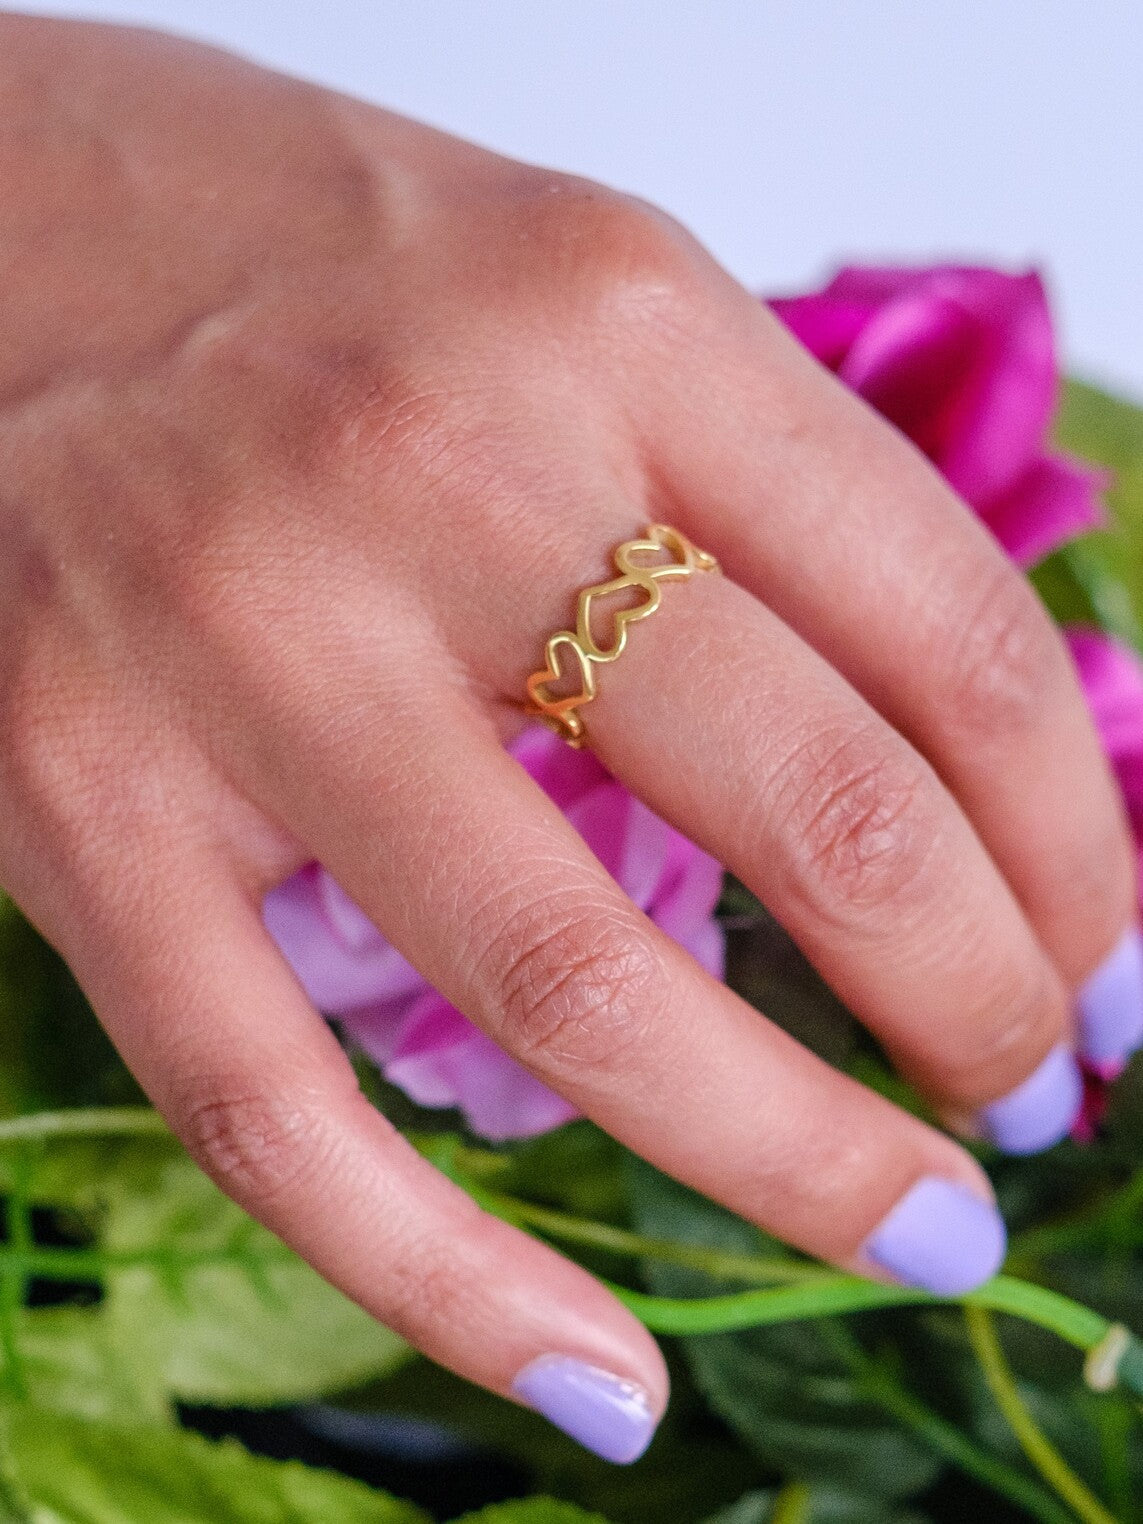 A woman's hand rests on flowers and wears a gold ring made up of connected stencil hearts